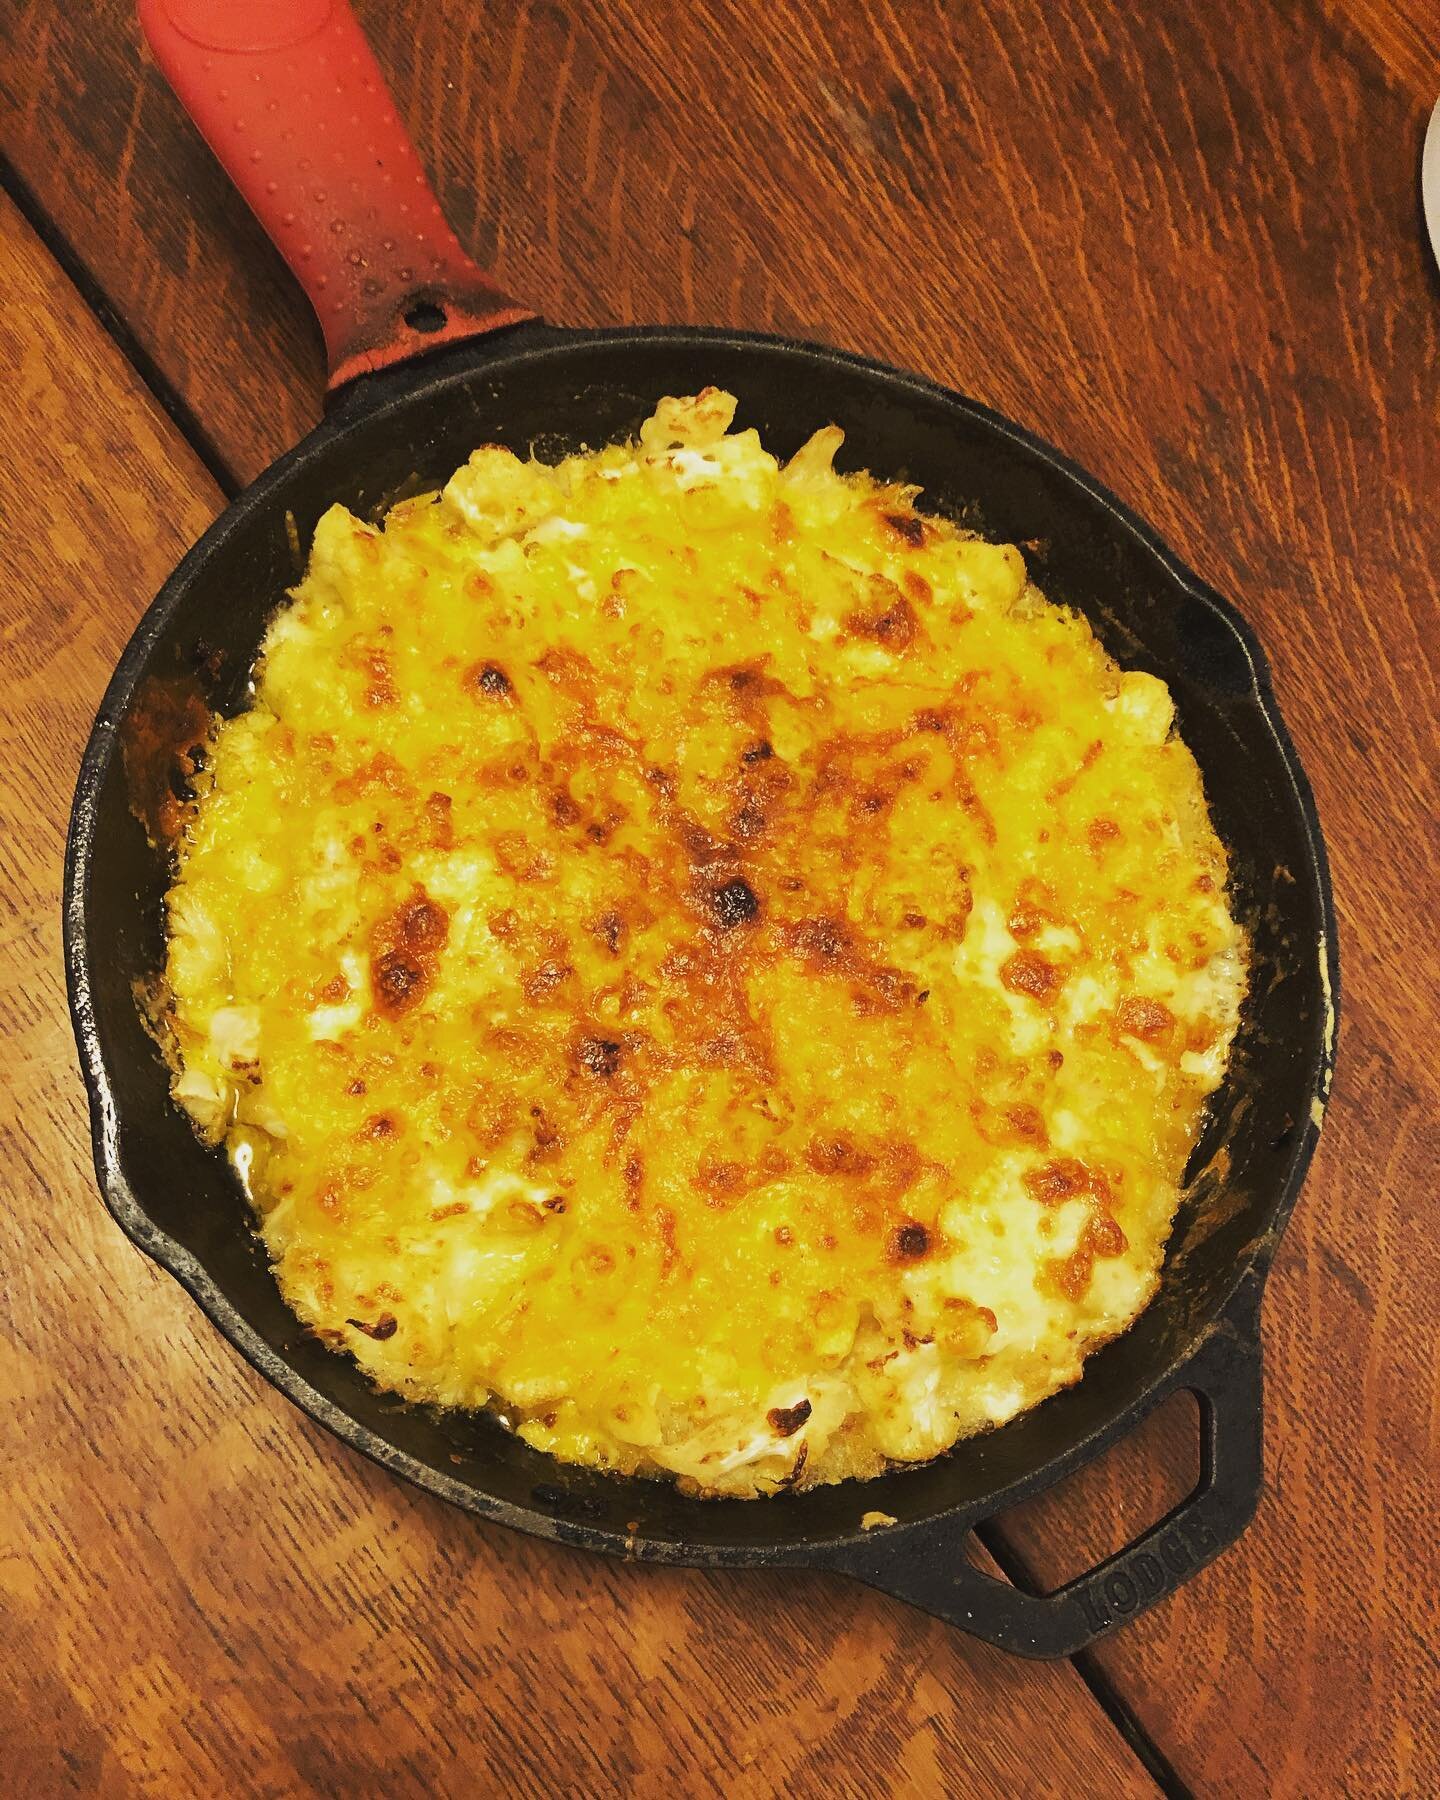 Cauliflower Mac and Cheese. We also had strip steak and potatoes and radishes. Breakfast was oaks soaked overnight with ACV and wild blueberries w raw milk and raw butter. Lunch was bone broth vegetable stew. Dessert after lunch was 3 ingredient sour